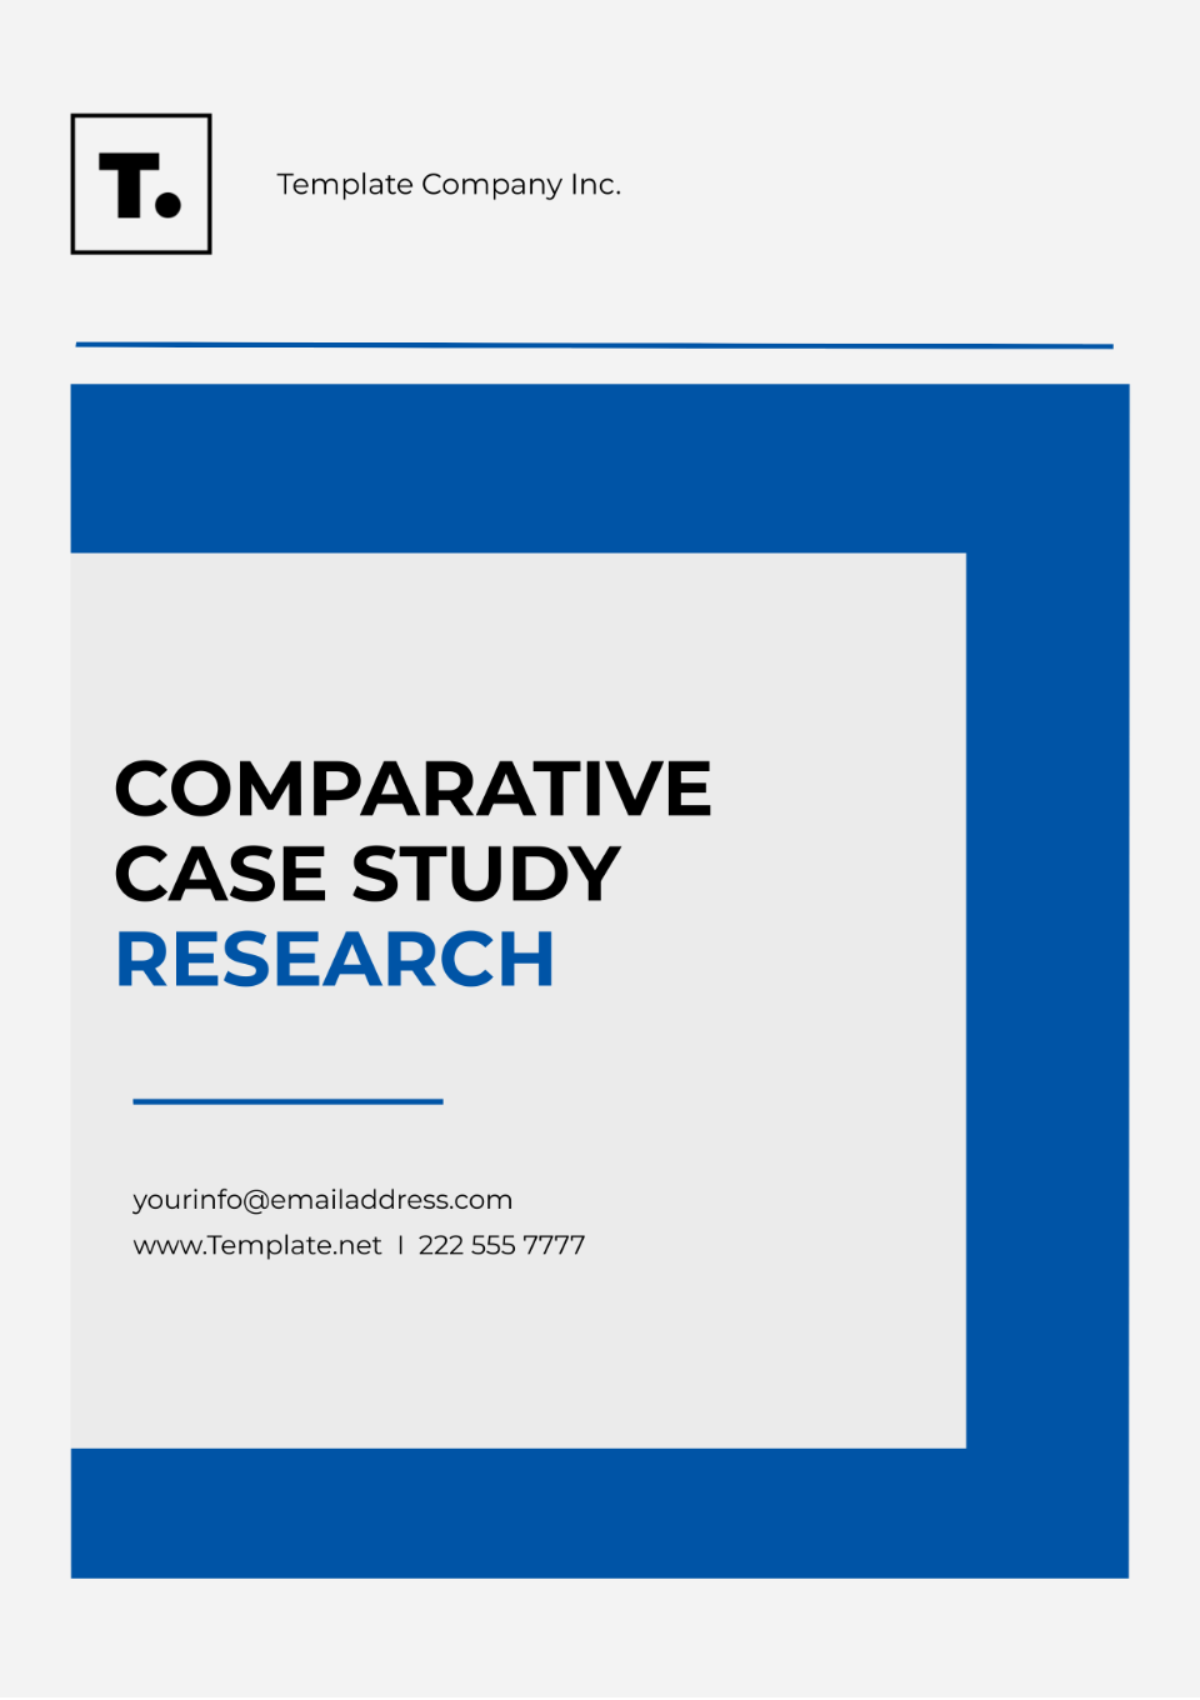 Free Comparative Case Study Research Template